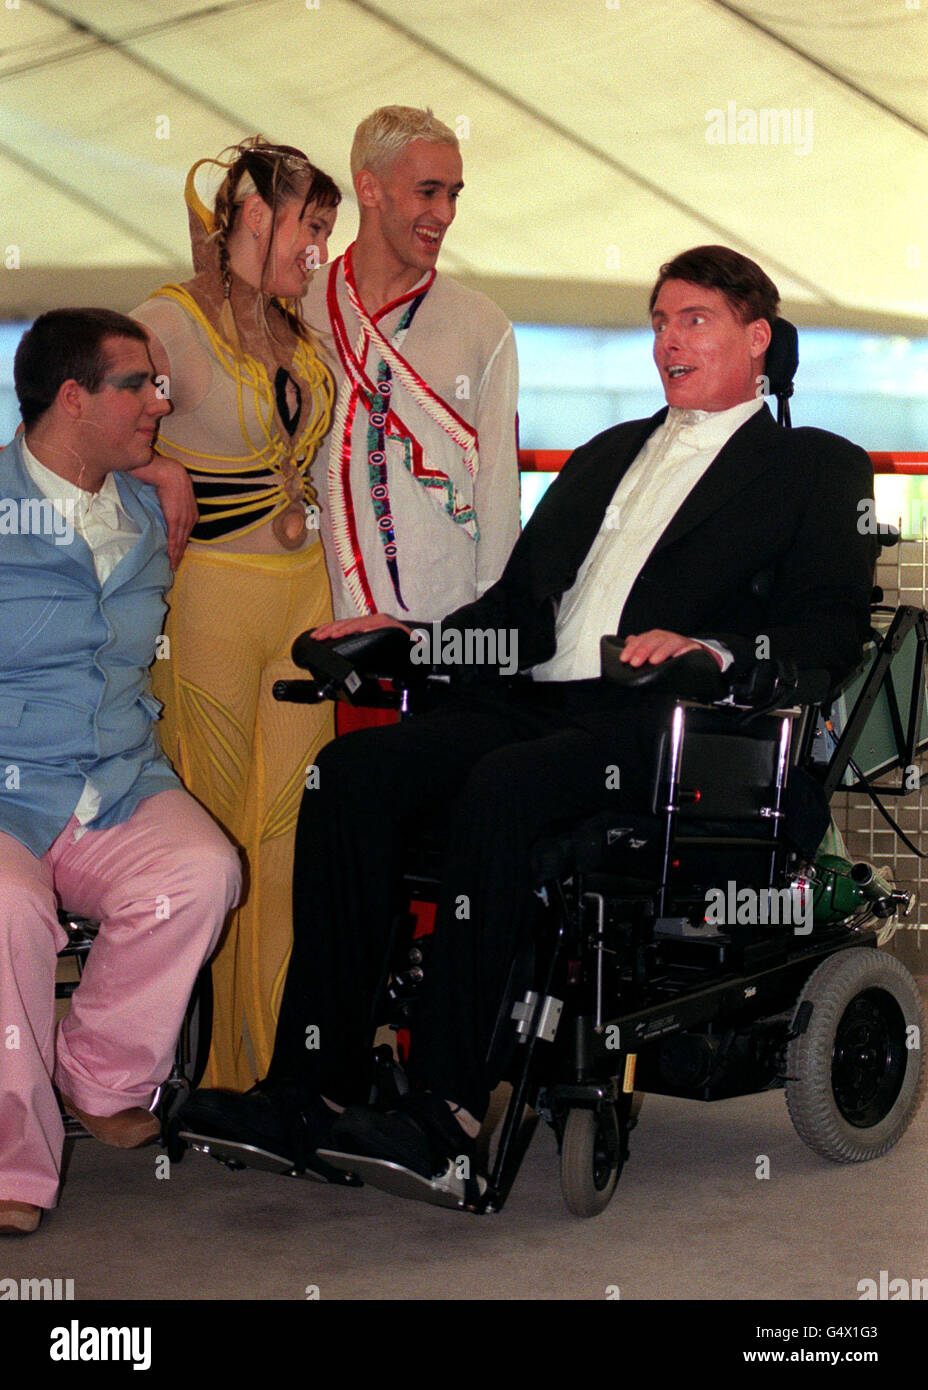 'Superman' actor Christopher Reeve with dancers (L-R) Colin White, Corinne Pierre and Matt Costain, during a visit to the Millennium Dome in Greenwich, London. This is the first trip the actor has made abroad since the riding accident which paralysed him. Stock Photo